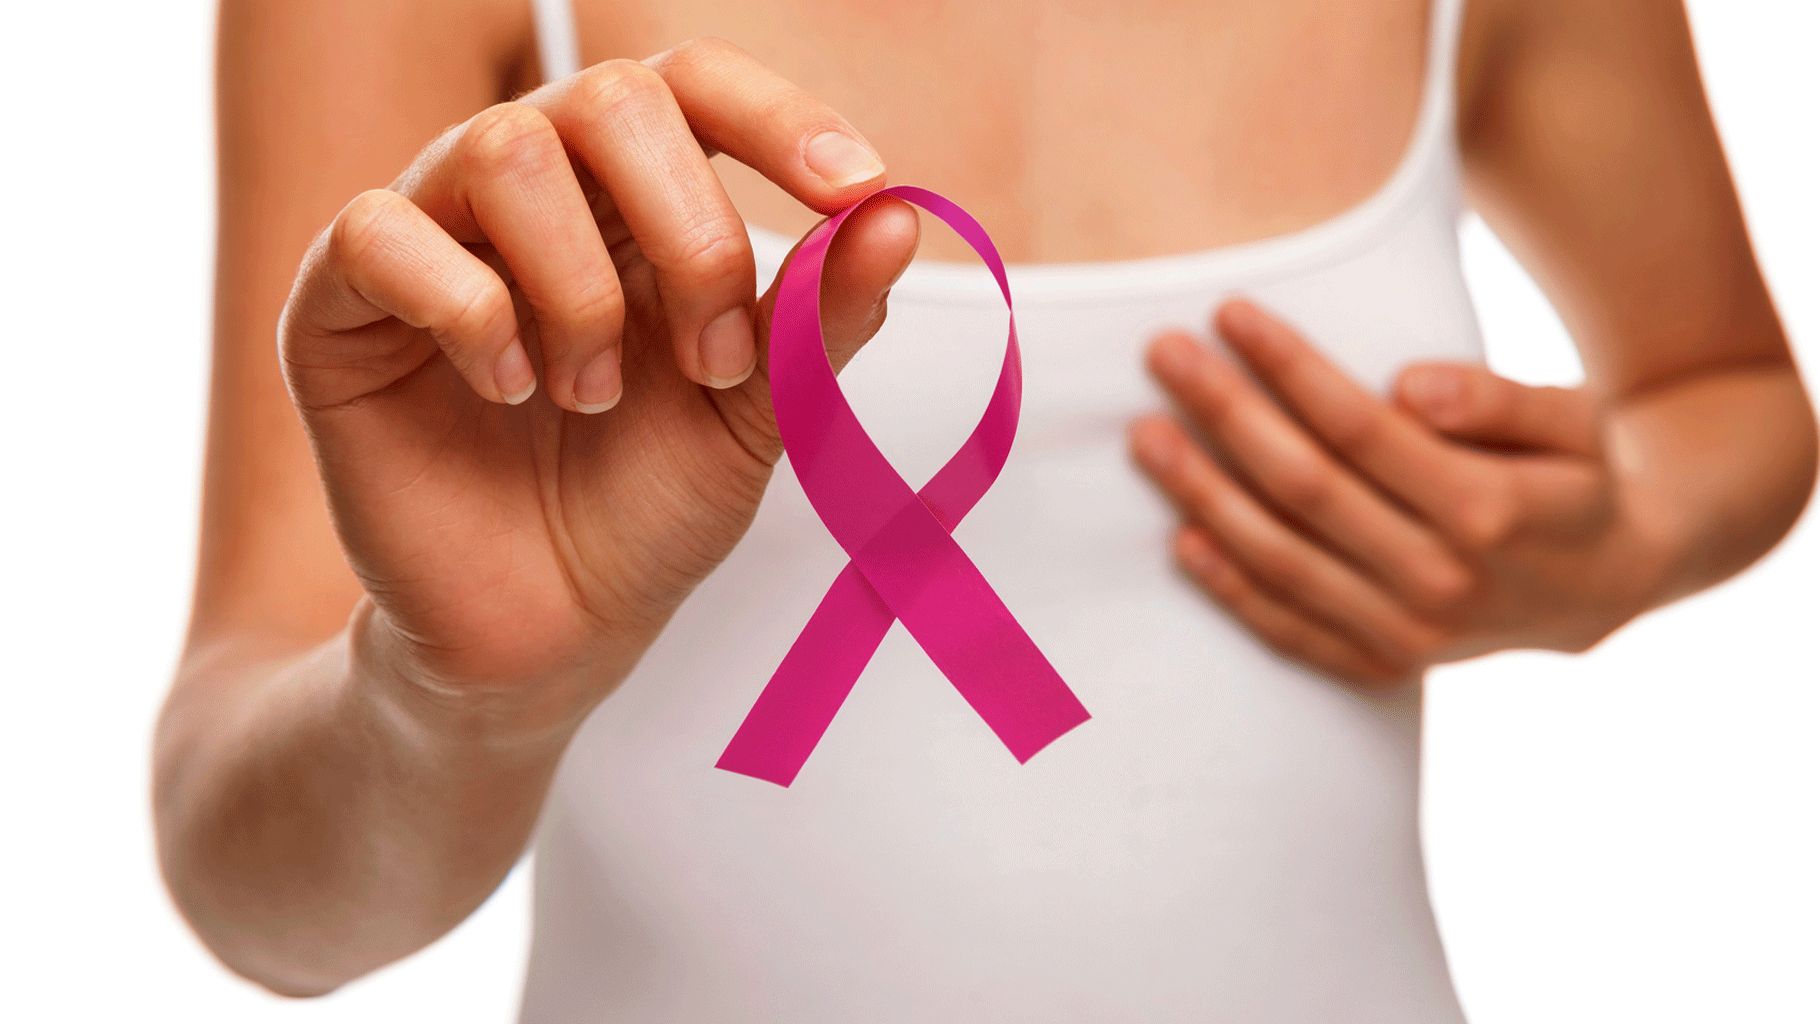 Dairy foods, especially milk, have been found to be associated with increased risk of breast cancer.